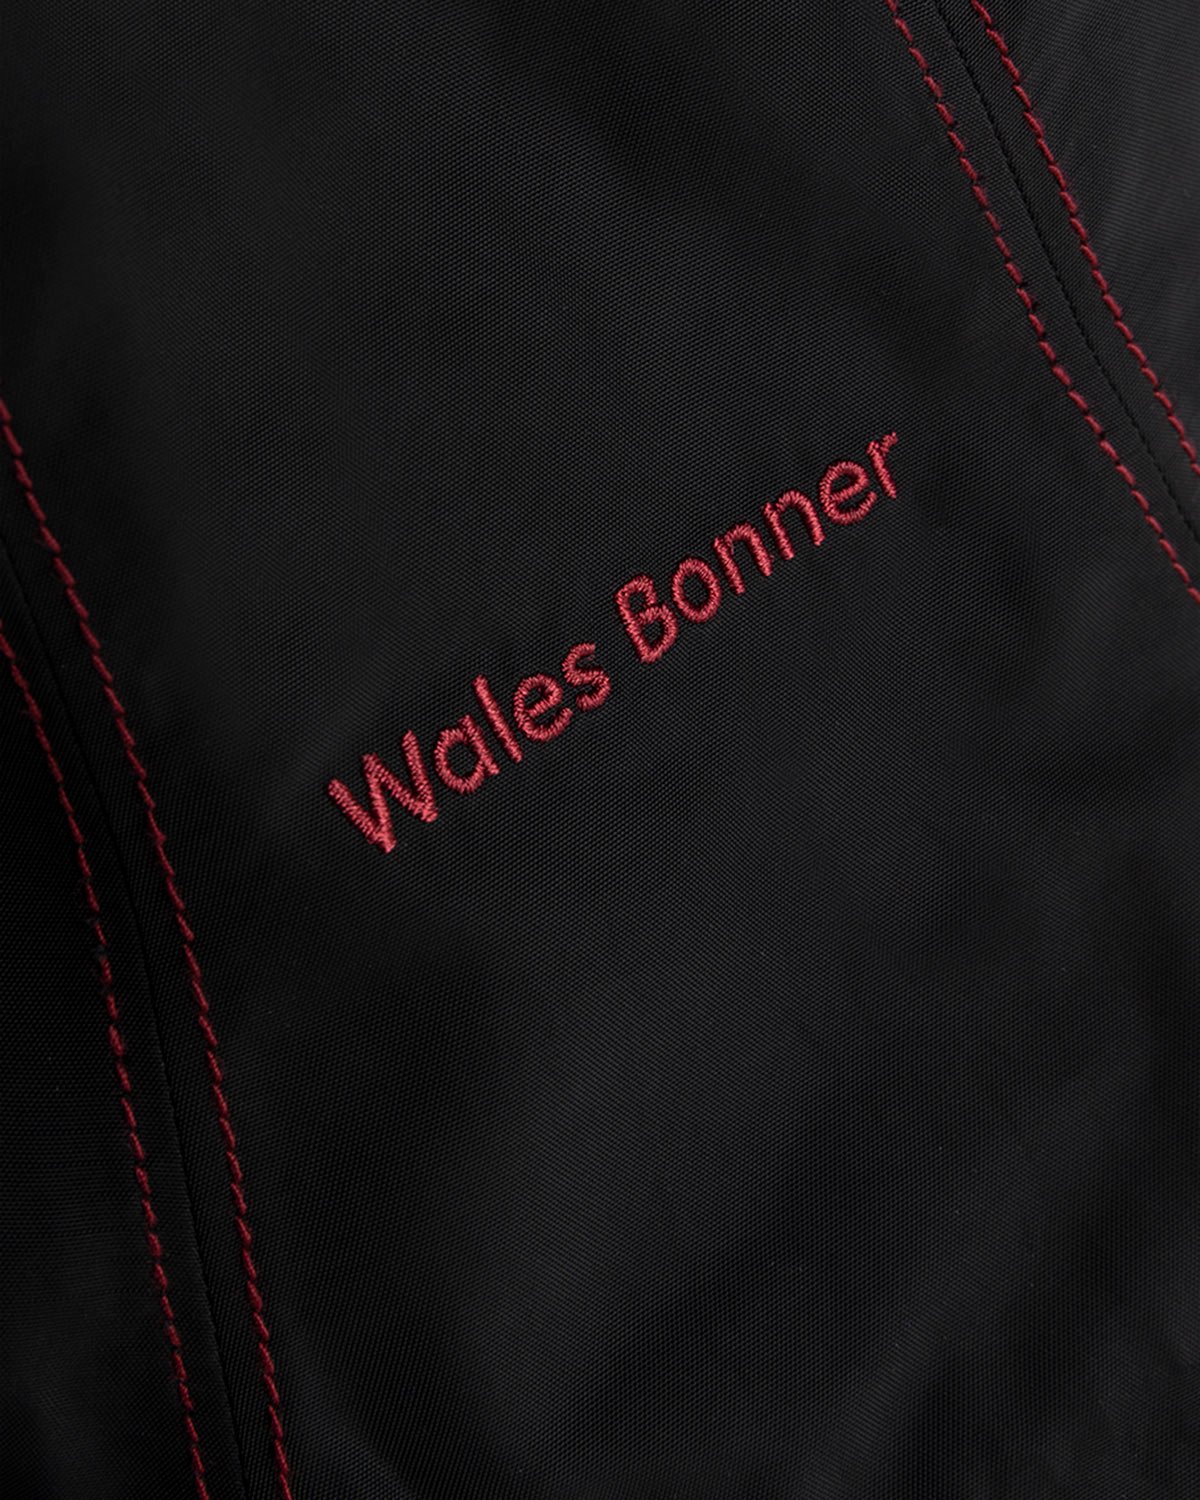 Adidas x Wales Bonner - Sunhat Black Burgundy - Accessories - Red - Image 3